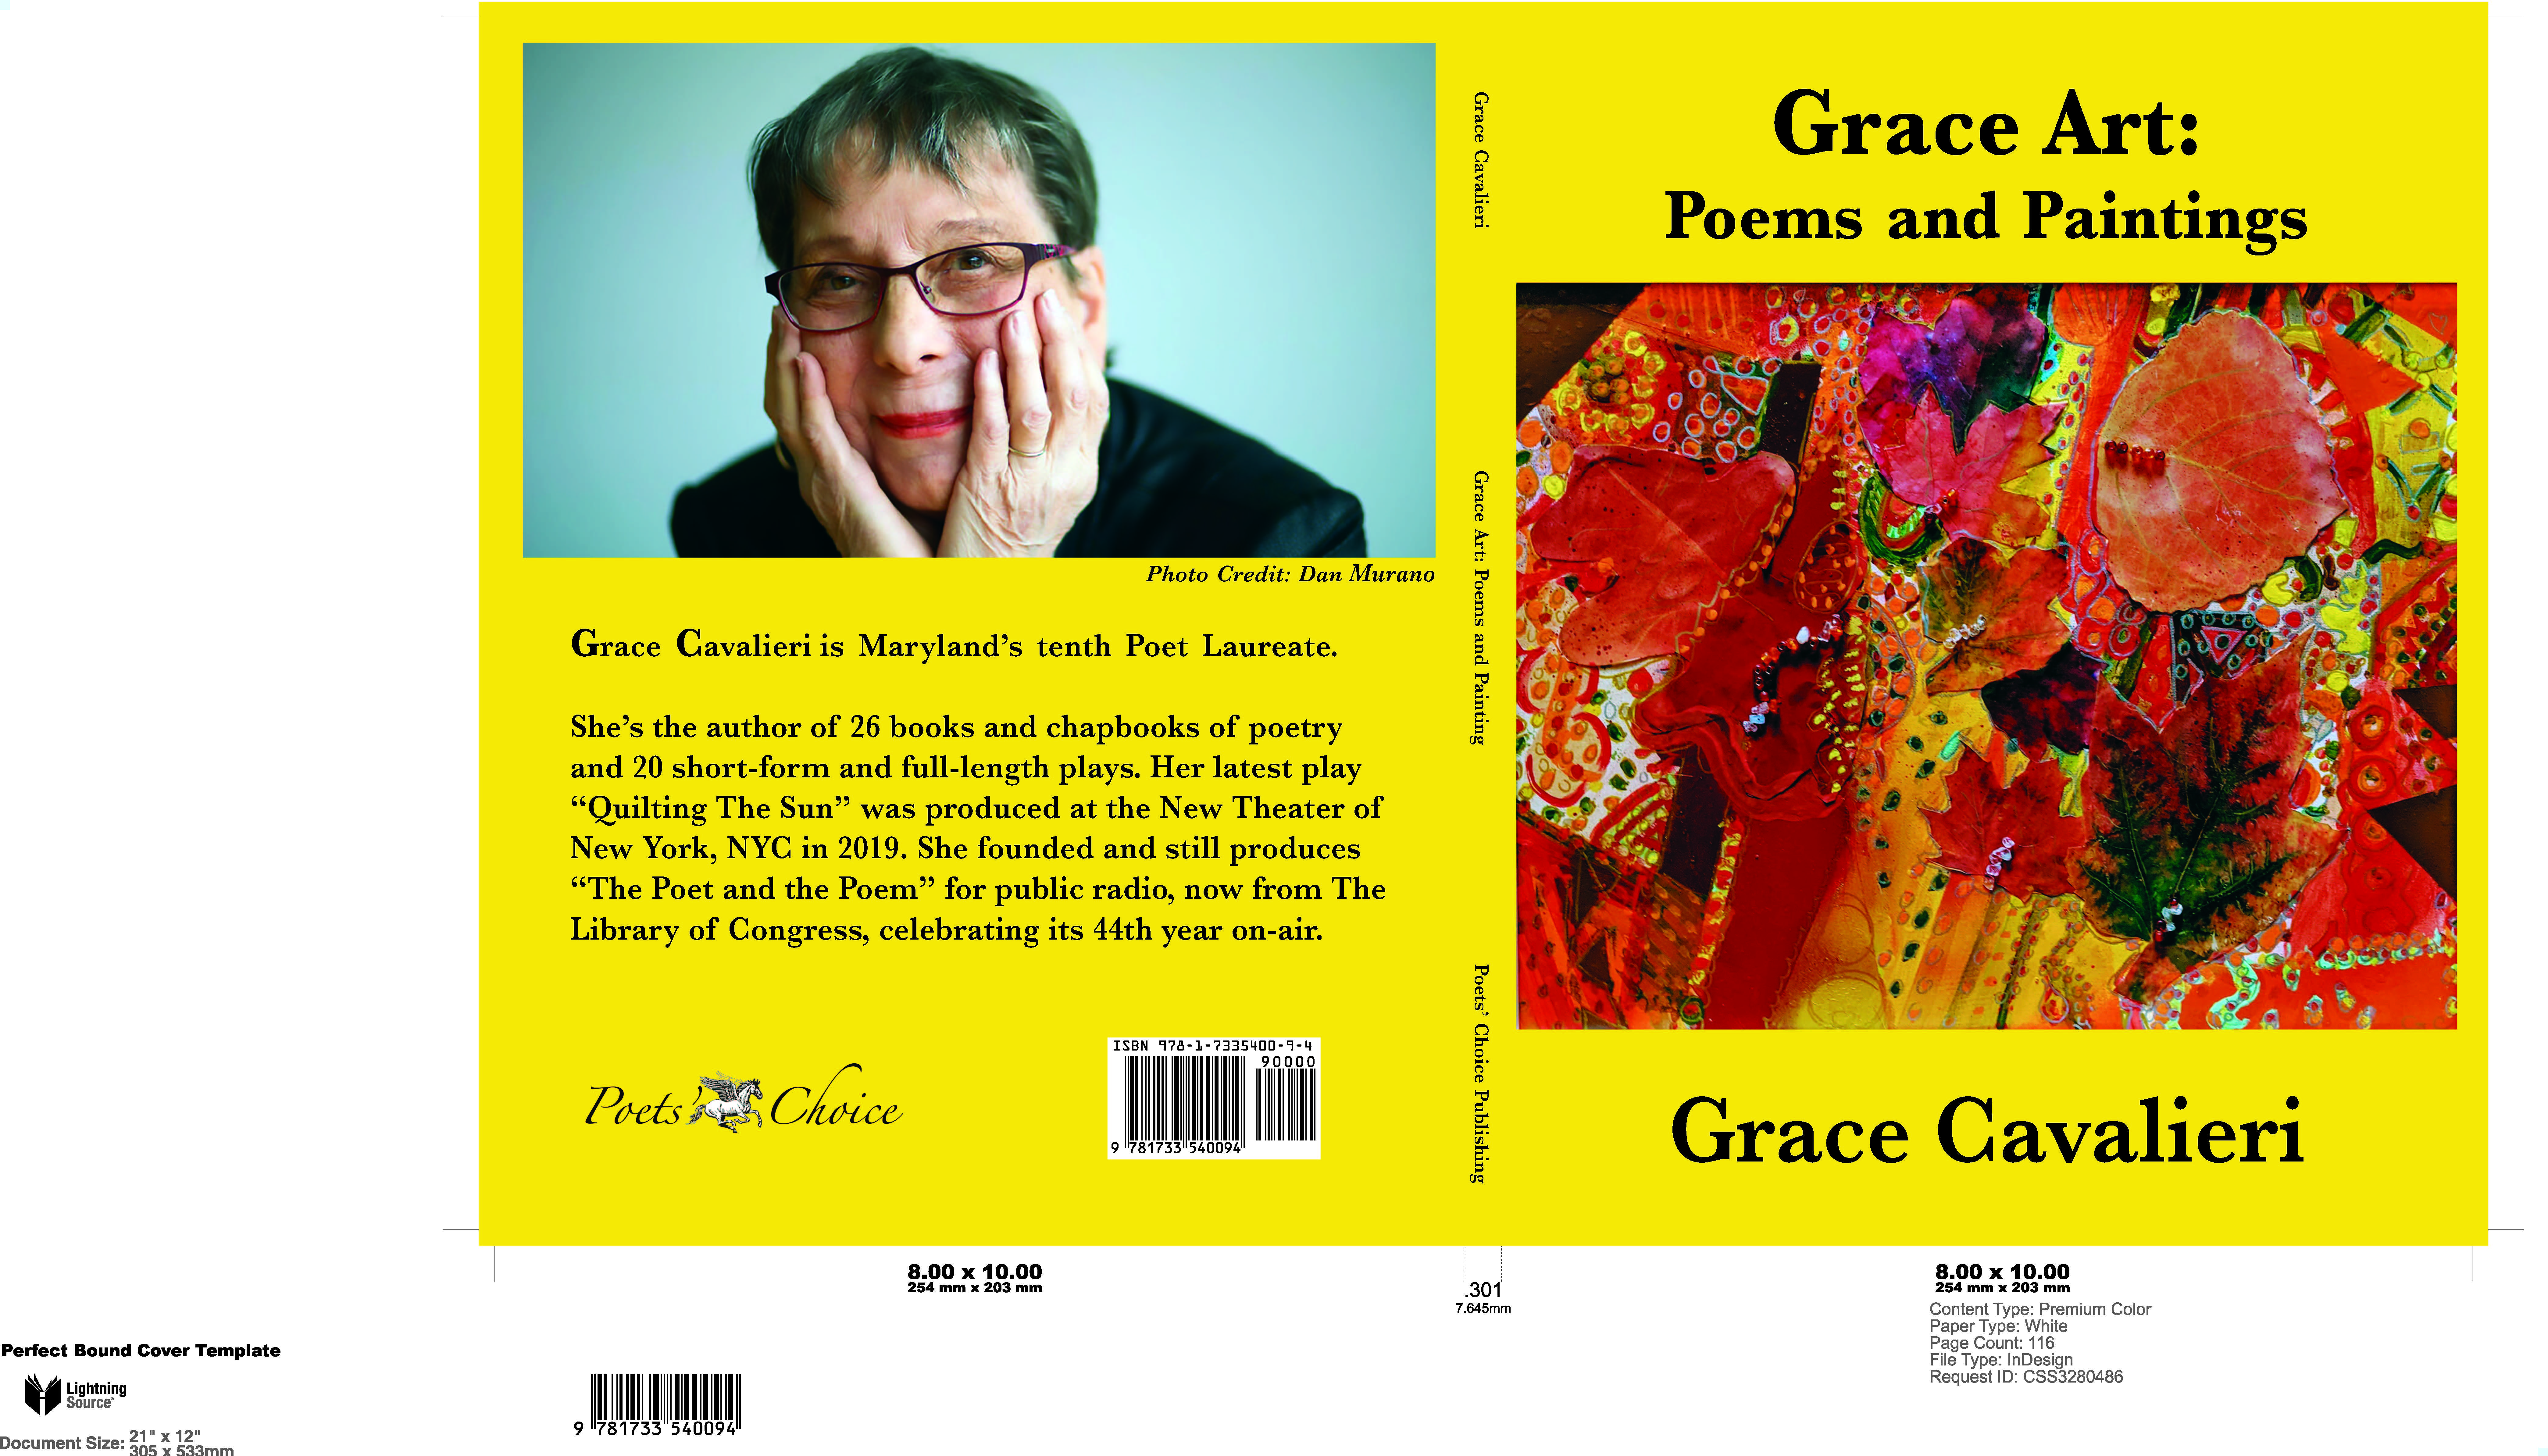 Poets Choice Publishing is Proud to Announce the Publication of GRACE ART: Poems and Paintings by Maryland’s 10th Poet Laureate